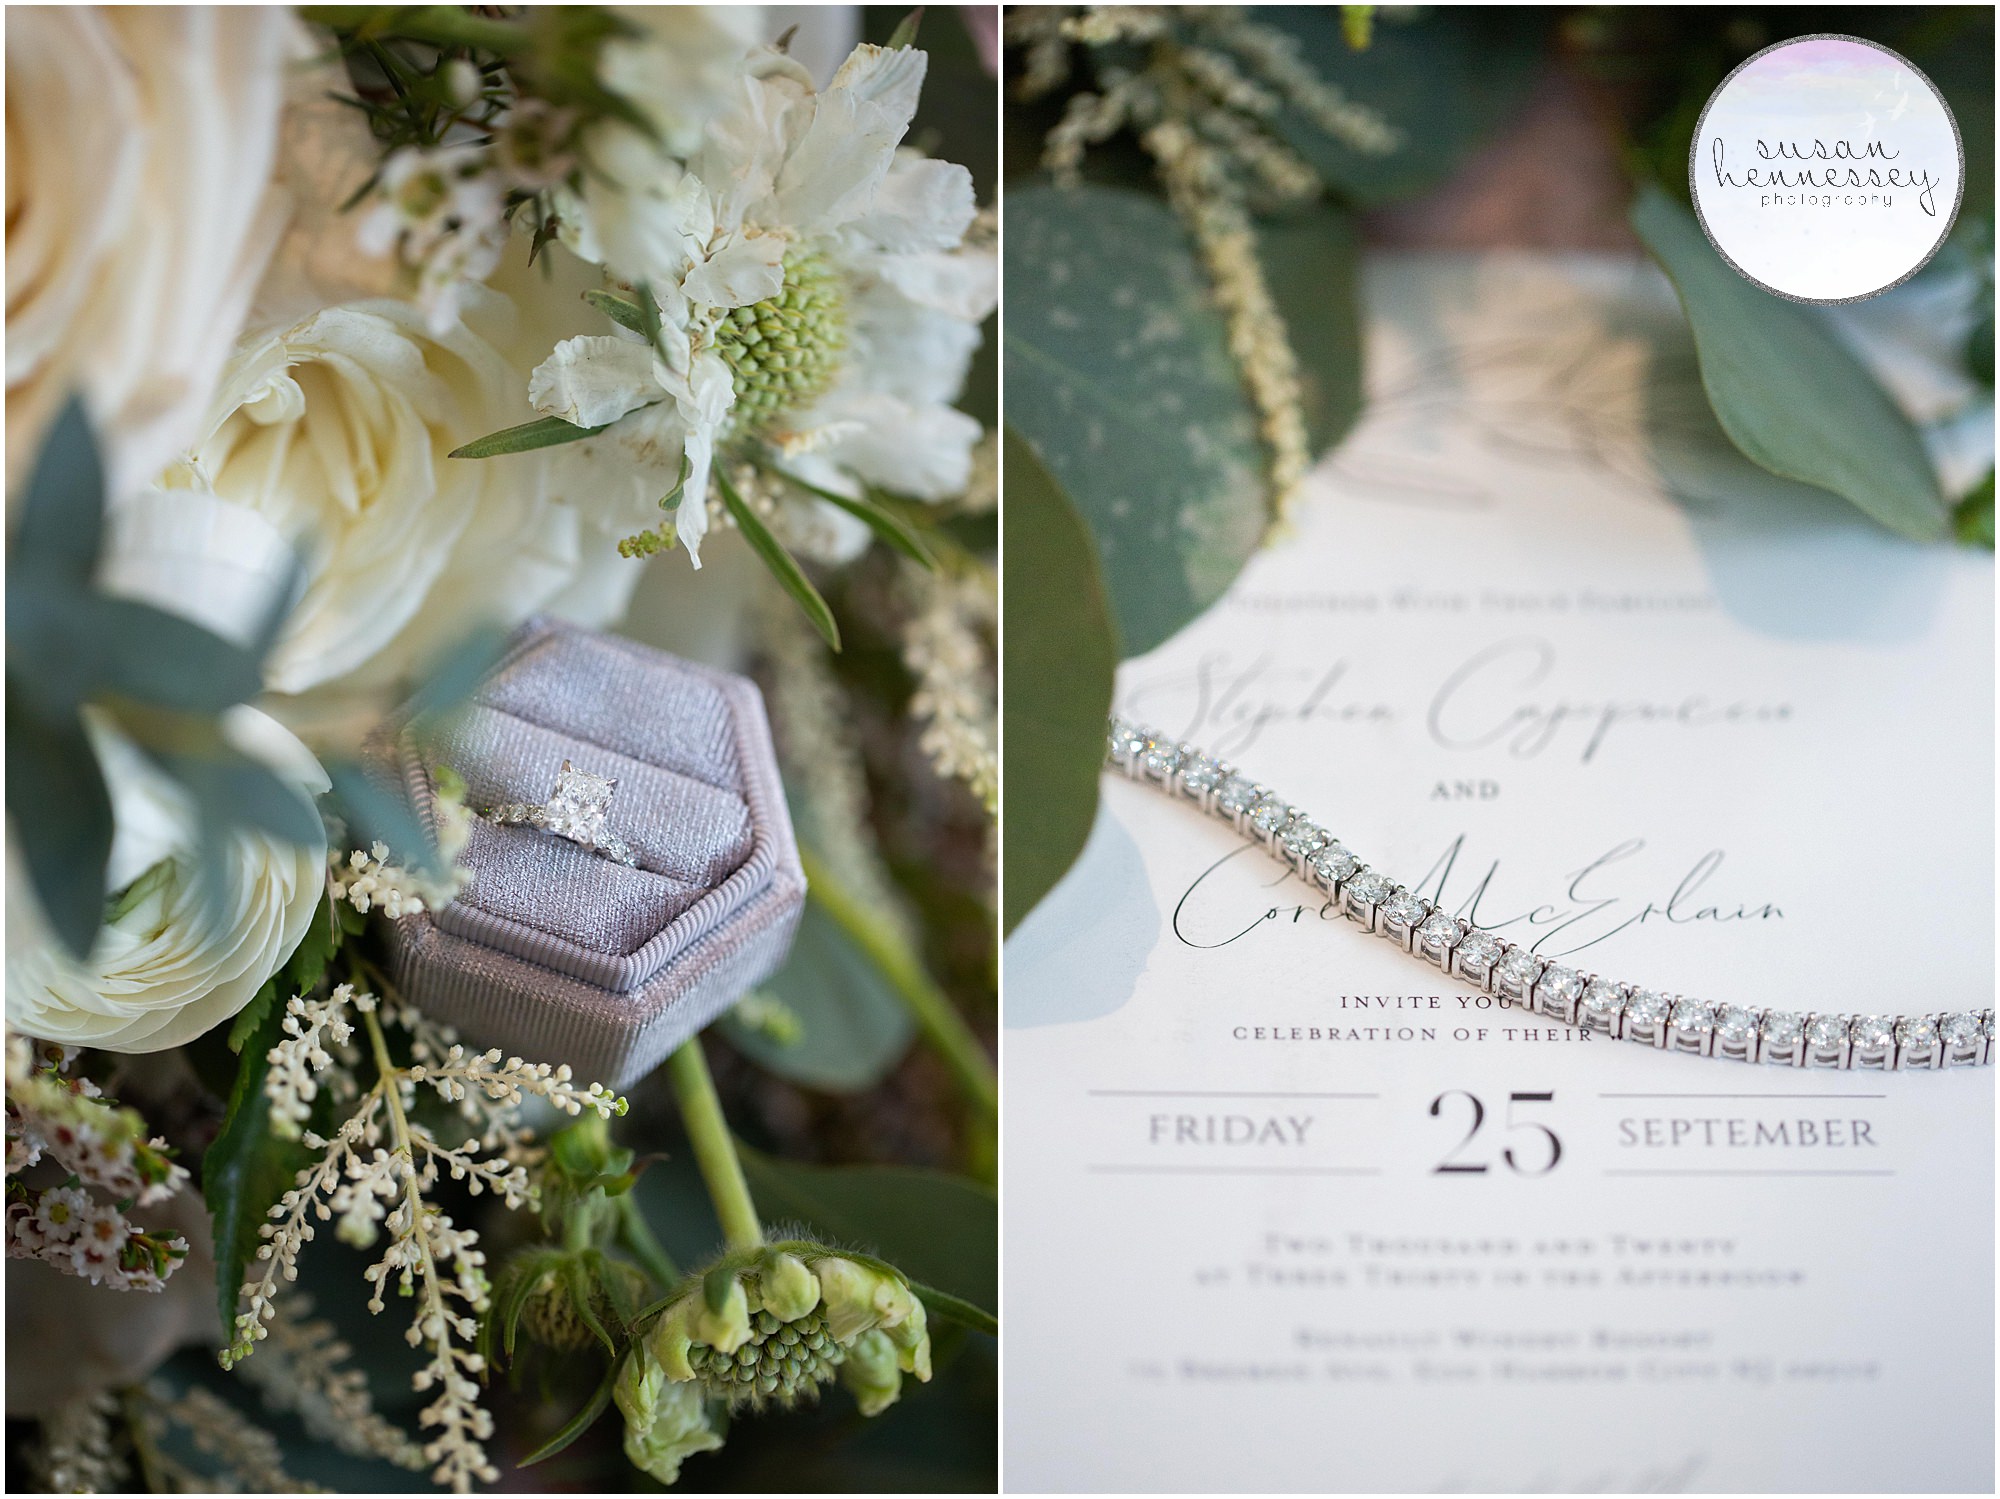 Bride's bracelet and engagement ring in ring box